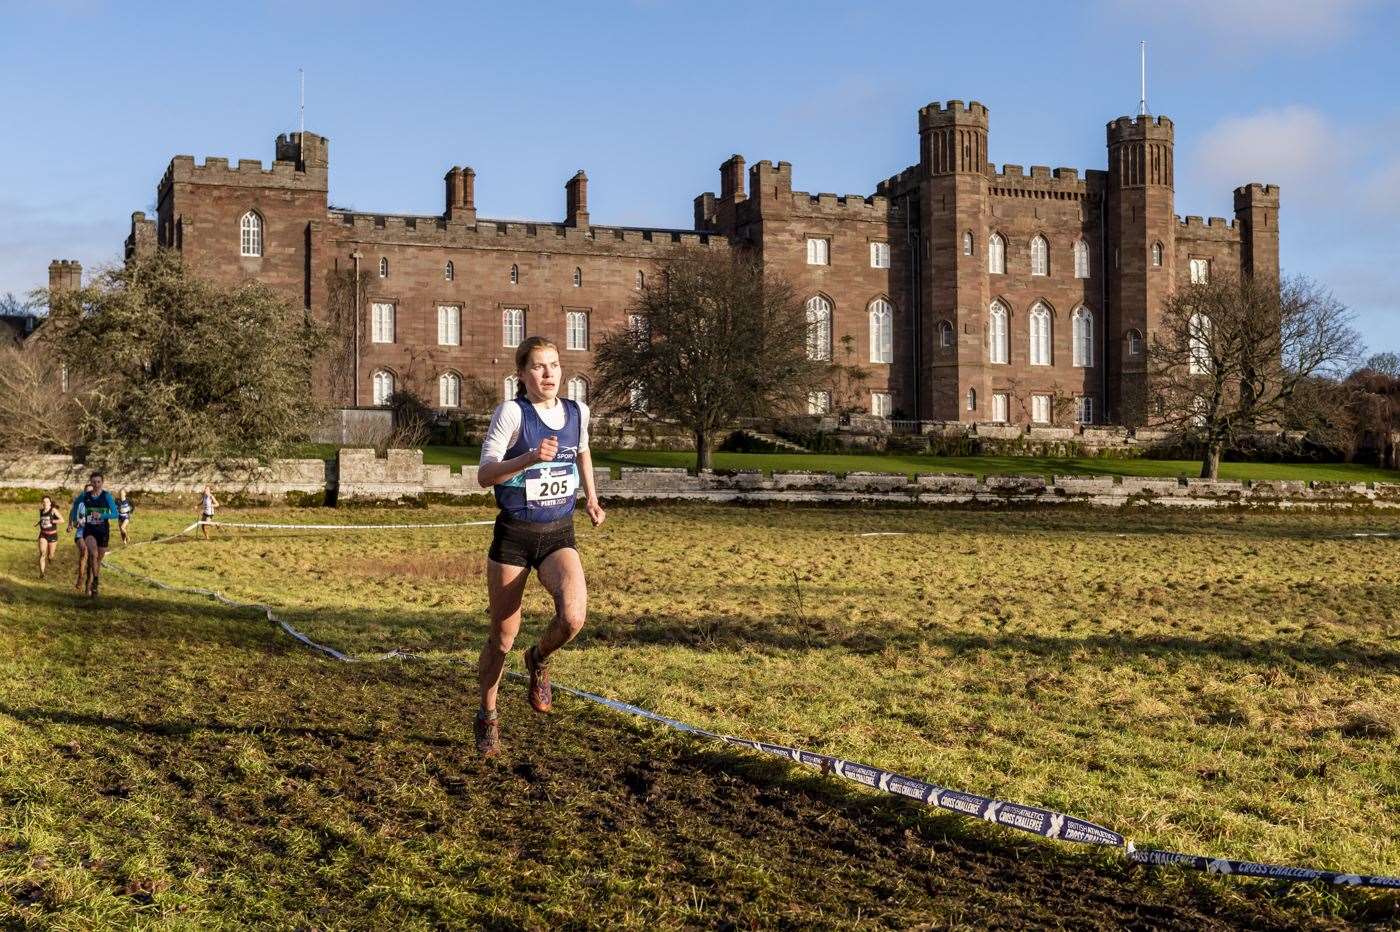 On the track rather than on cross country, Megan Keith put in a performance to be proud of – even though it was not enough to book a place in Saturday's final. Picture: Bobby Gavin